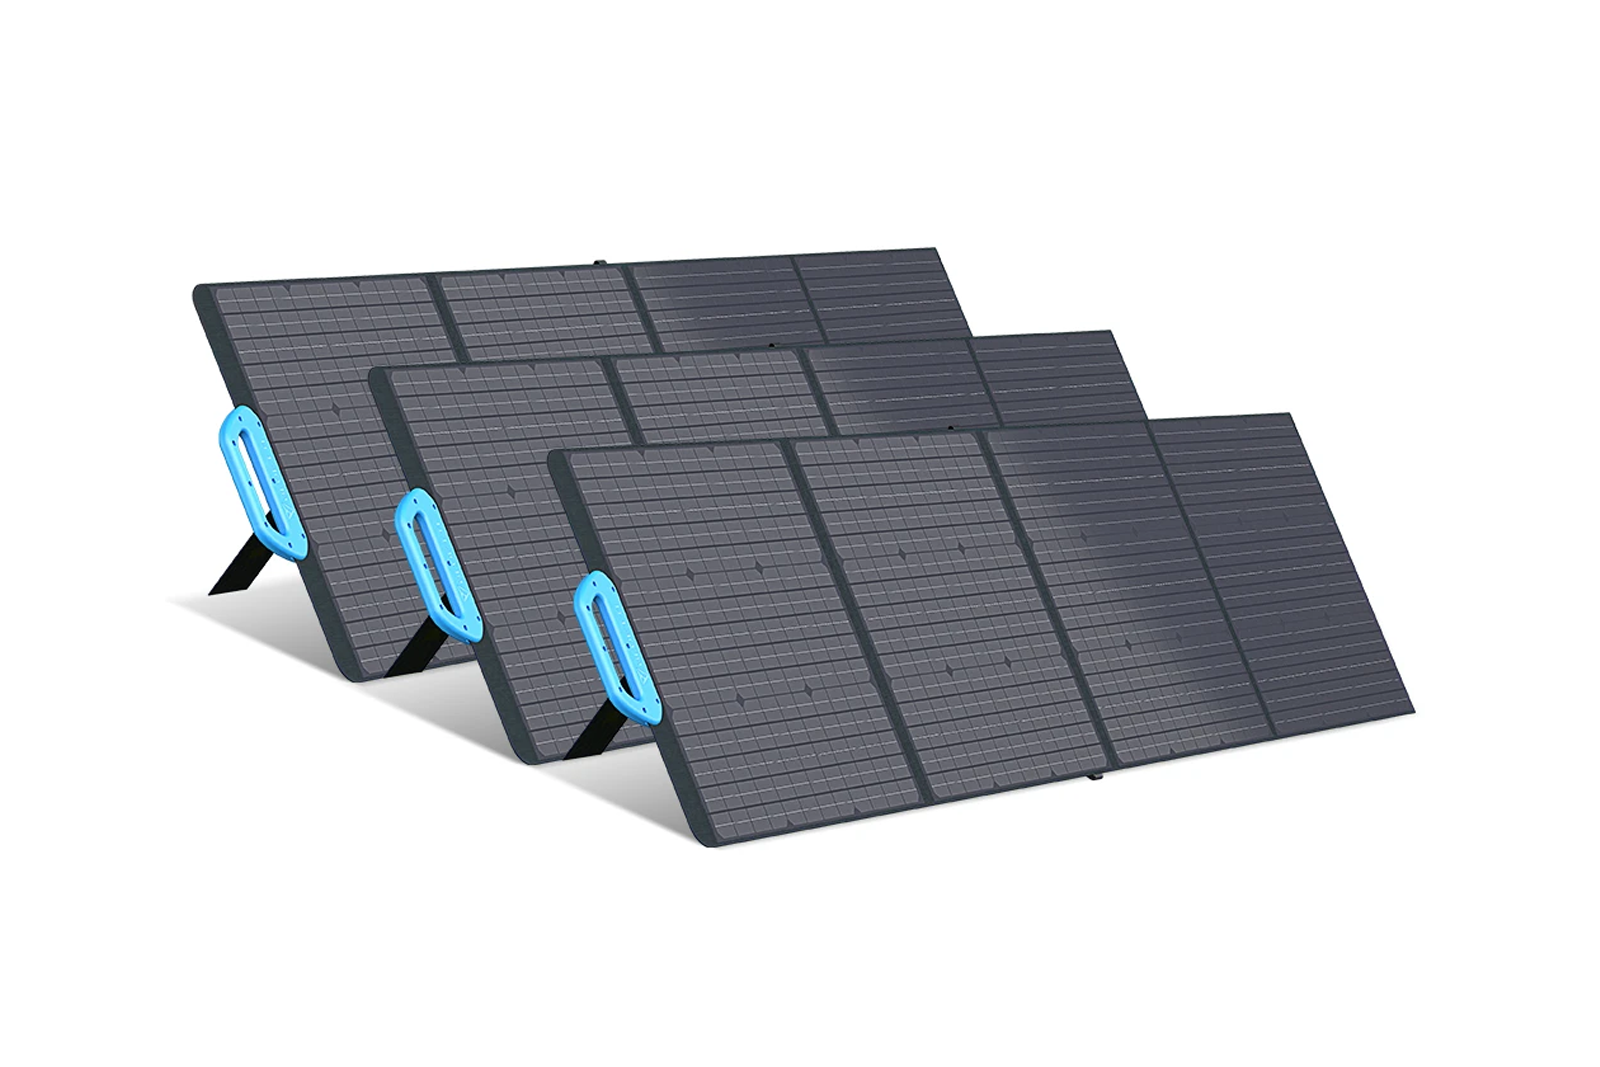 Take solar power efficiency to the next level with Bluetti's PV120/200 solar panels photo 1